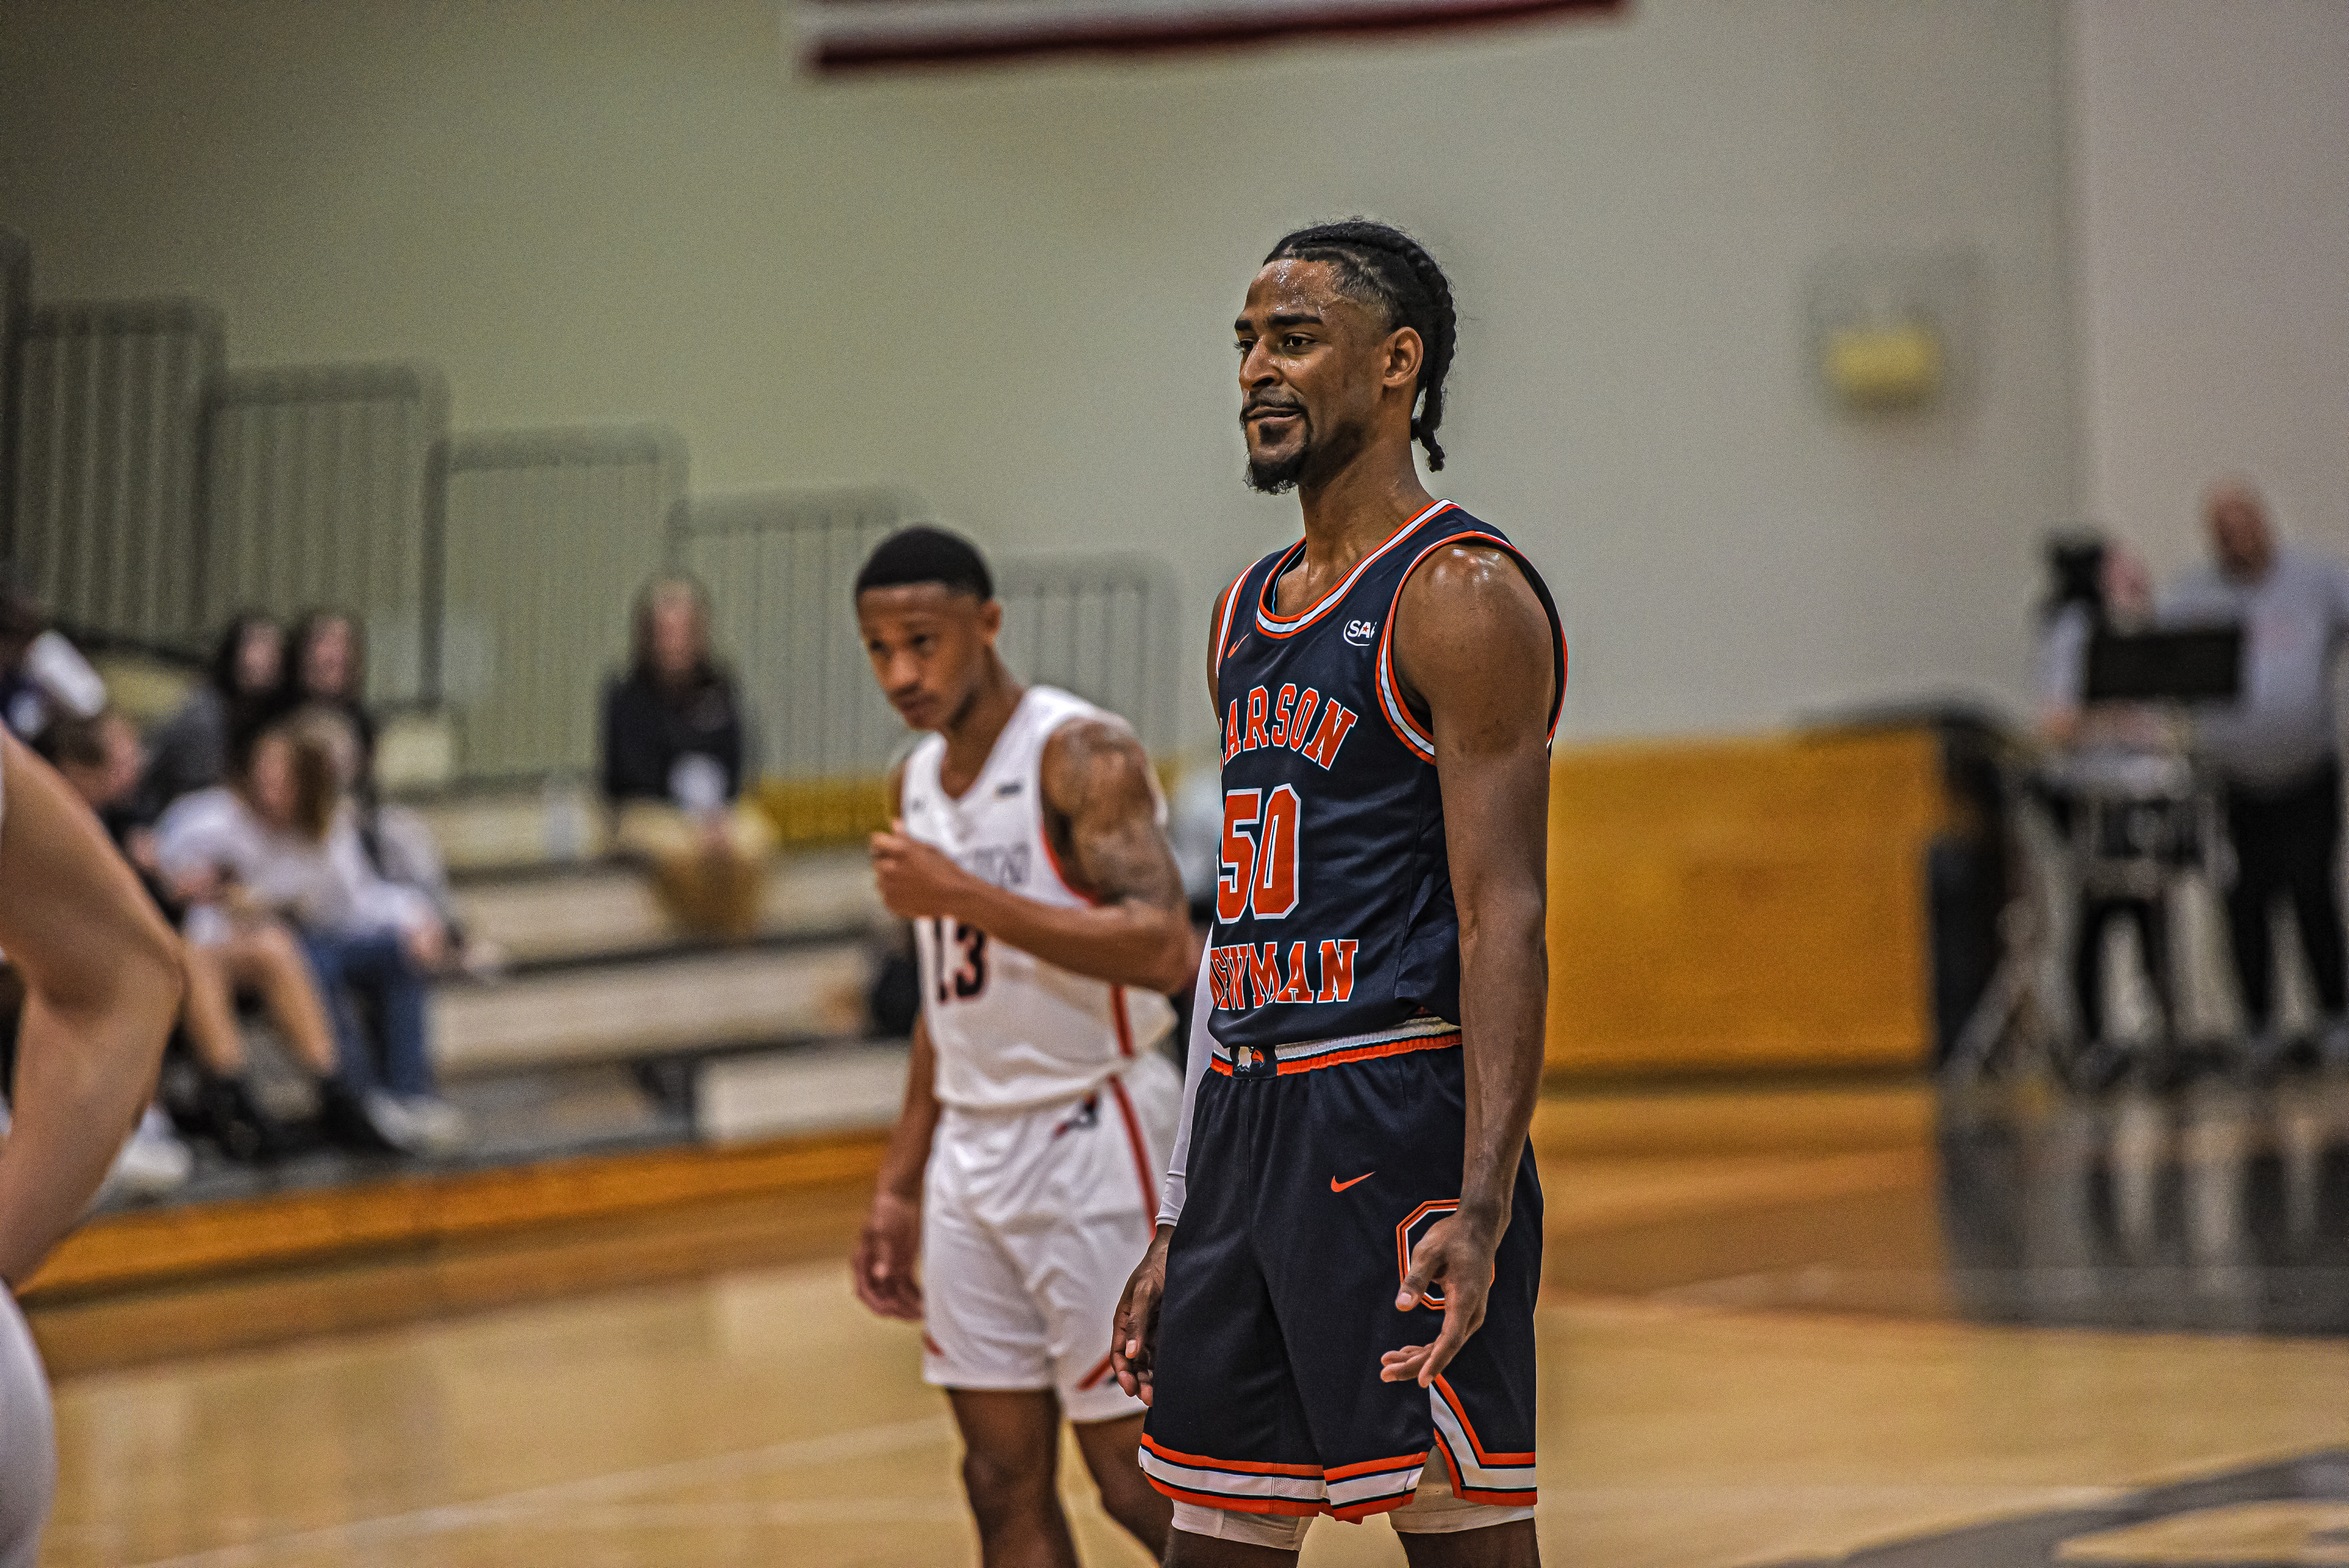 Carson-Newman falters in foul-fest at Tusculum